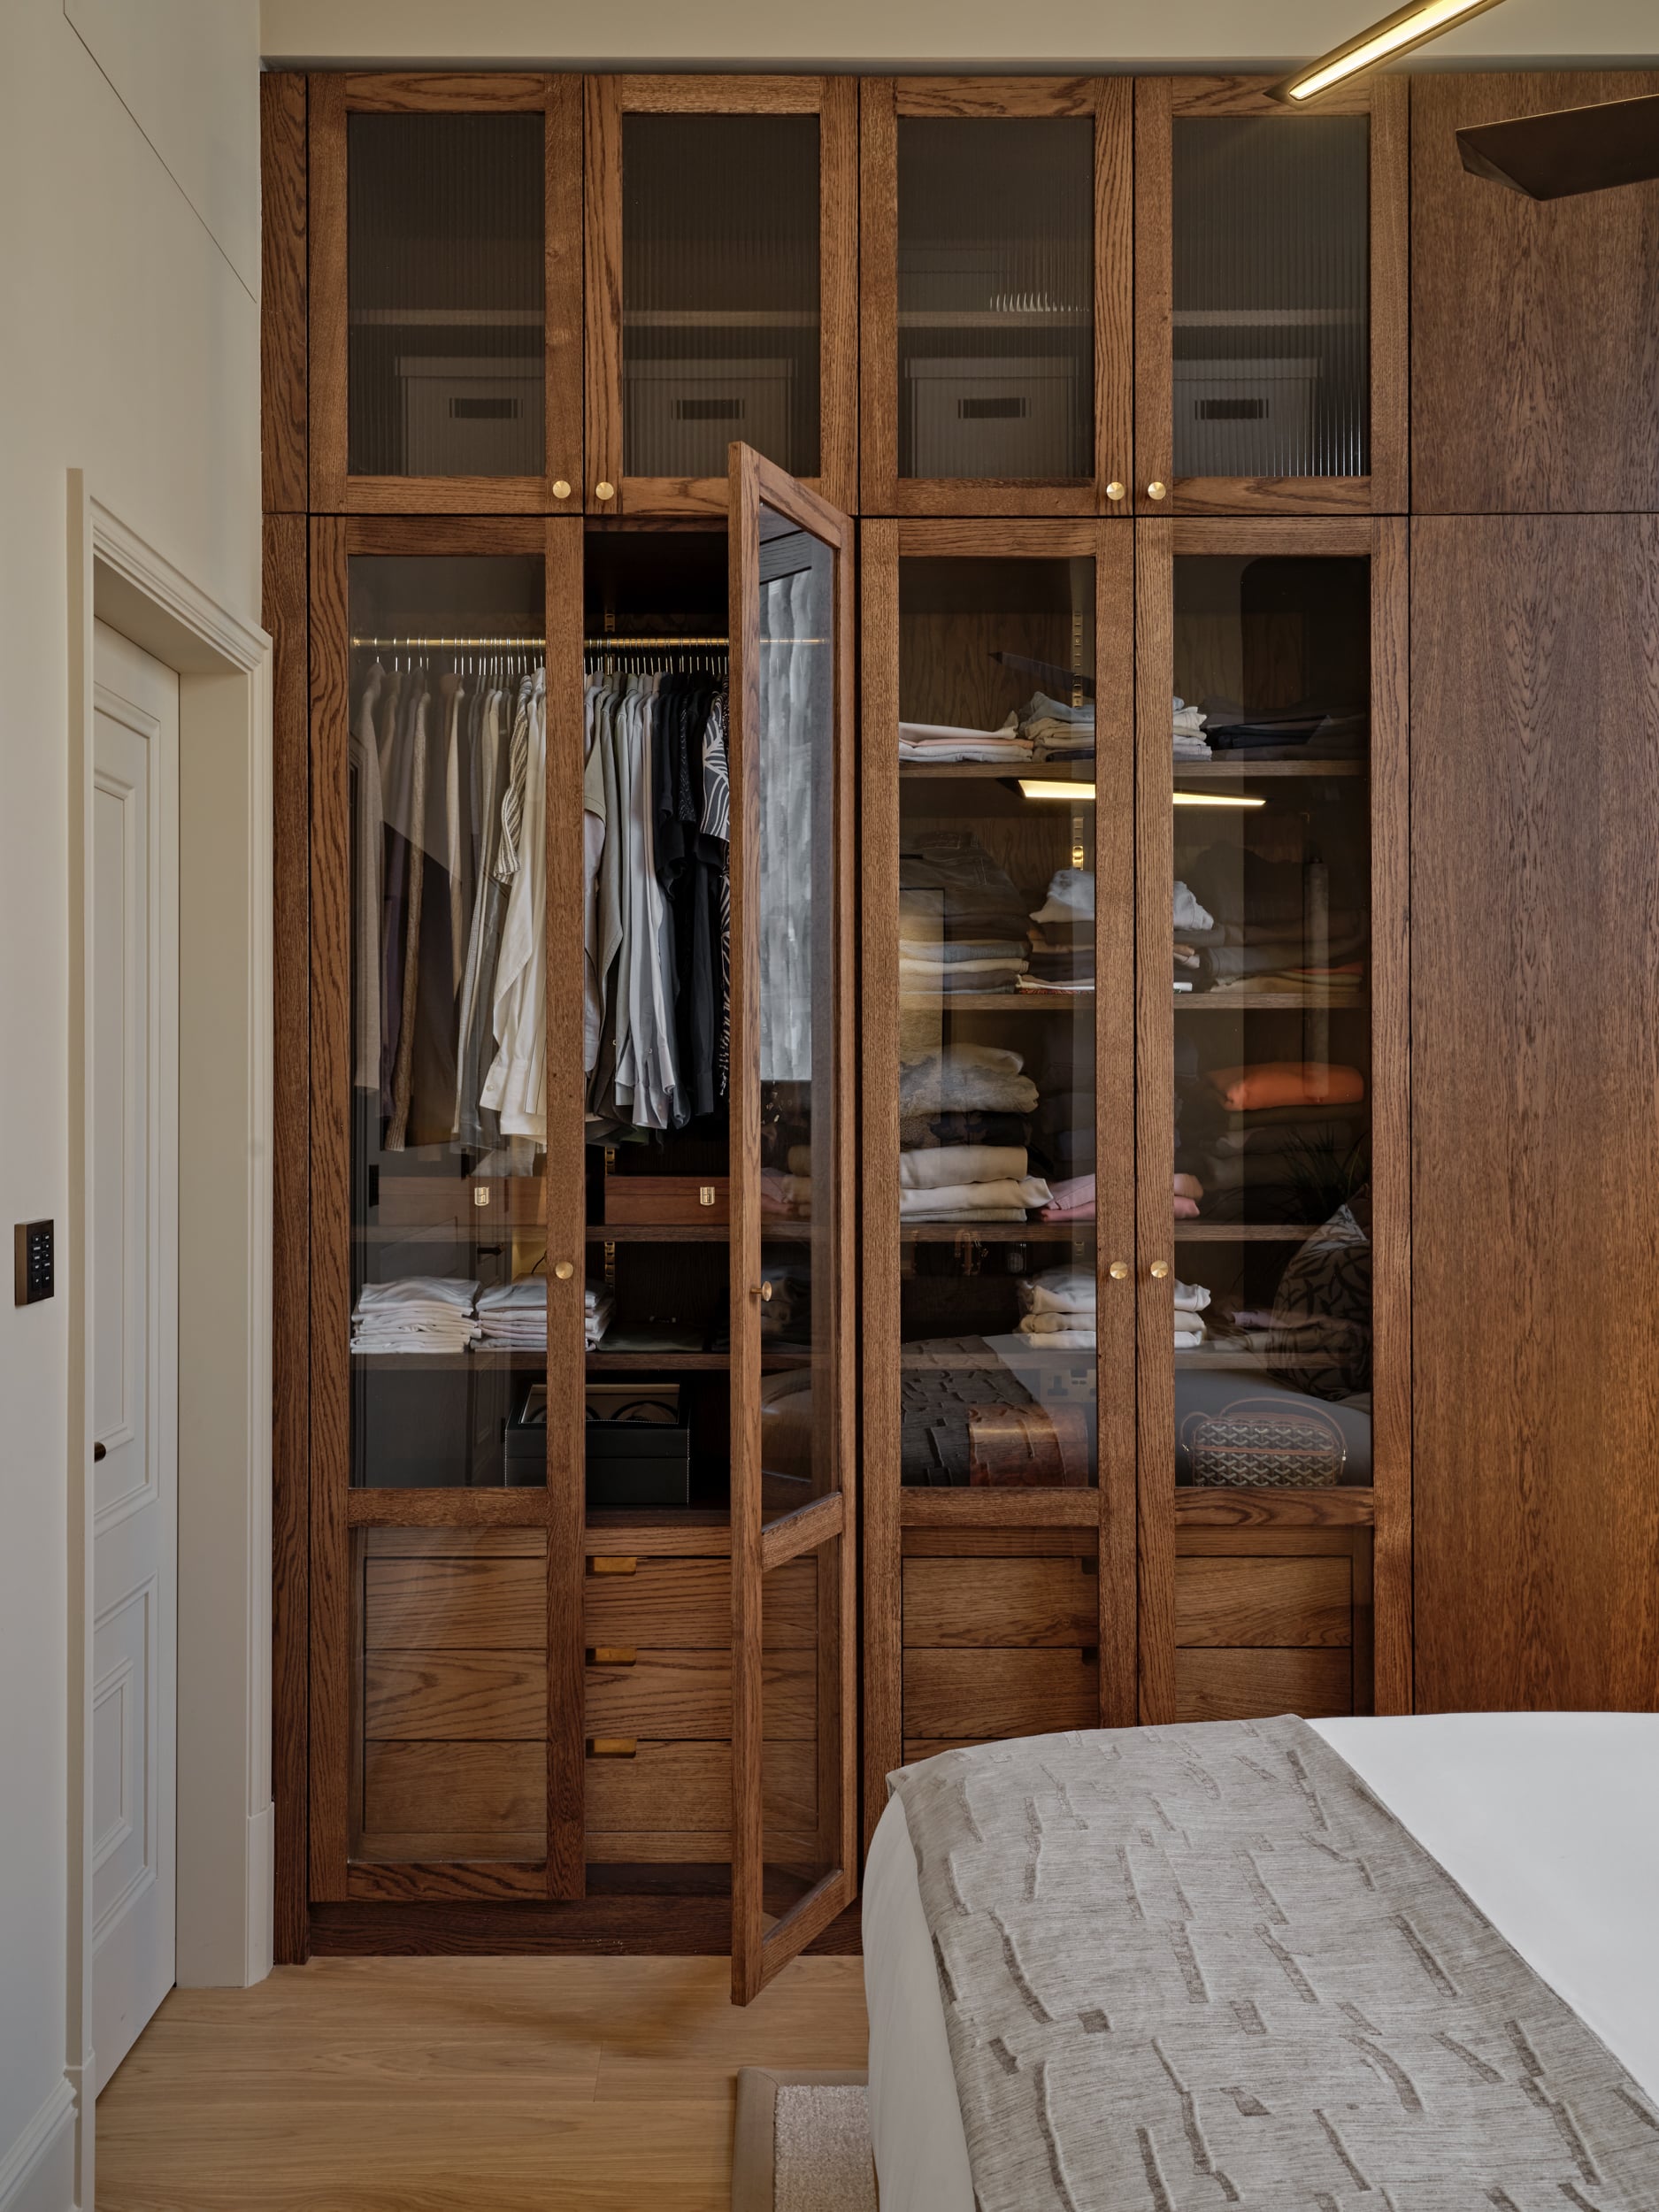 A bespoke wardrobe in a bedroom, making optimum use of space and keeping things sleek. The design appeals both aesthetically and functionally, accommodating the existing clothing, shoes, accessories, and so on, while also leaving enough room for new purchases. The custom wardrobe in the bedroom allows the owner to stay organised and enjoy getting ready in the mornings.